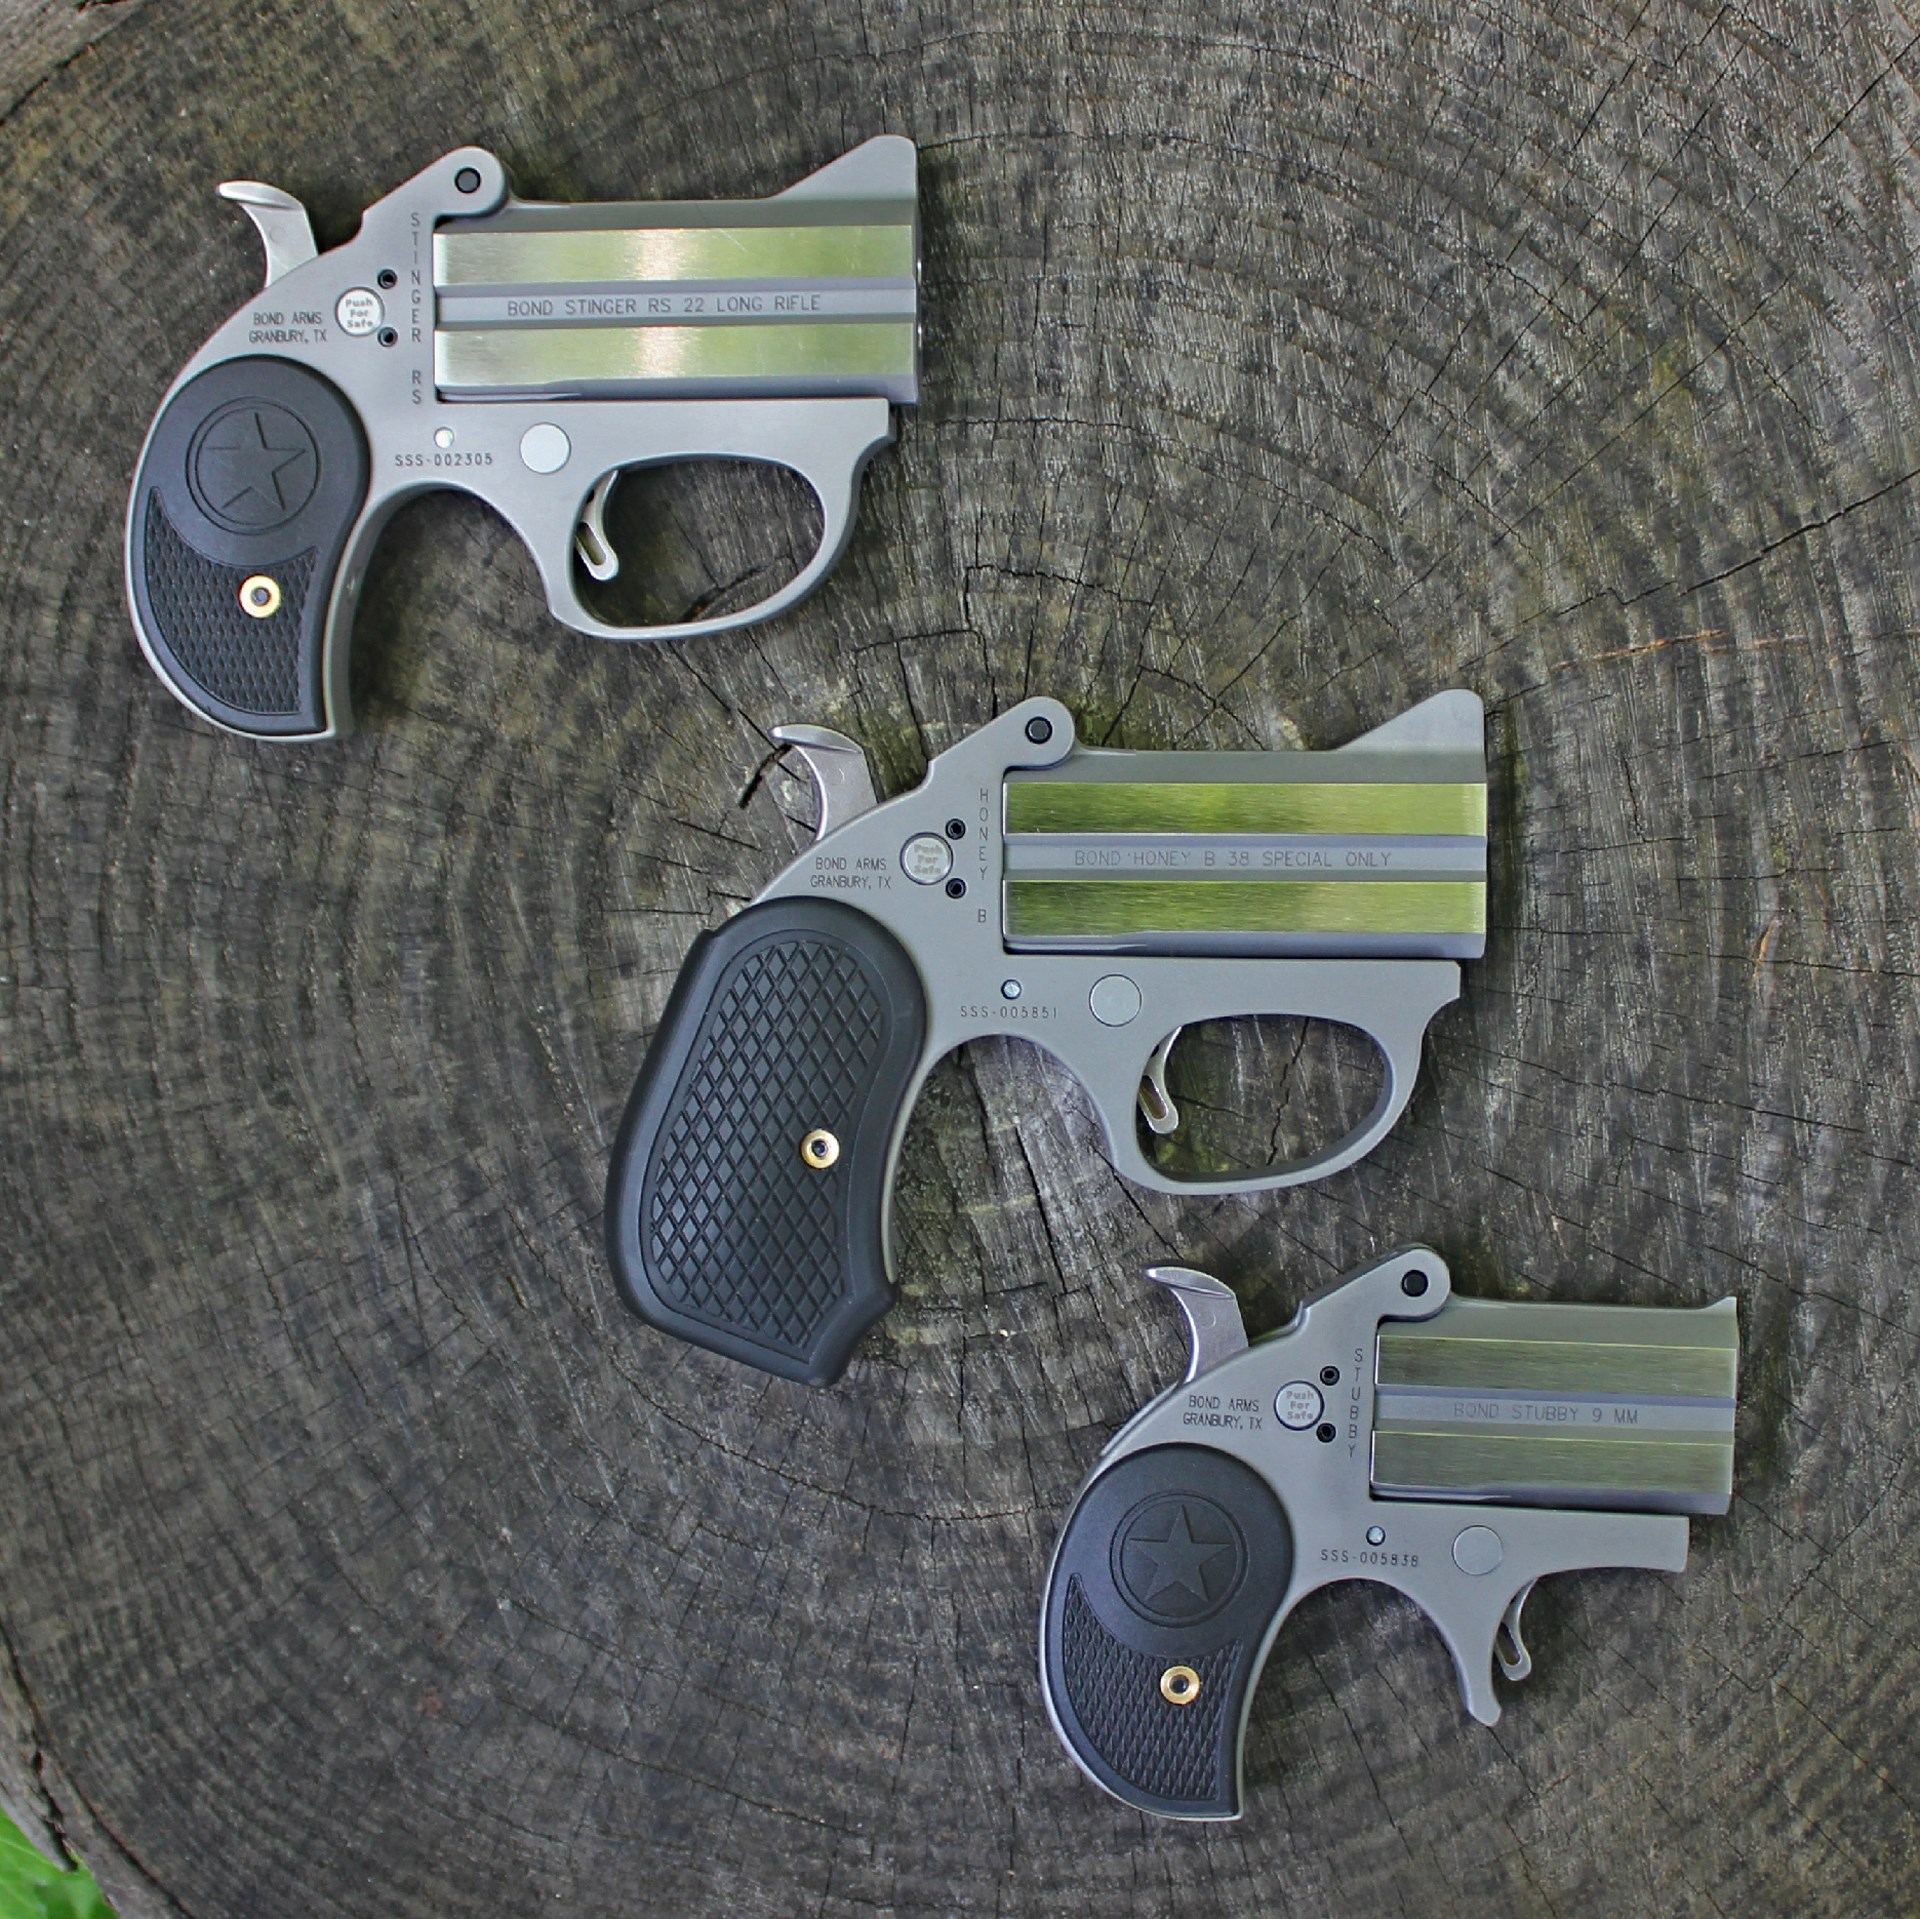 Three bond arm derringer double-barrel pistols on wood log New Stinger RS model options include the .22 LR version (top), the Honey B .38 Spec. (center) and the Stubby 9 mm (bottom).